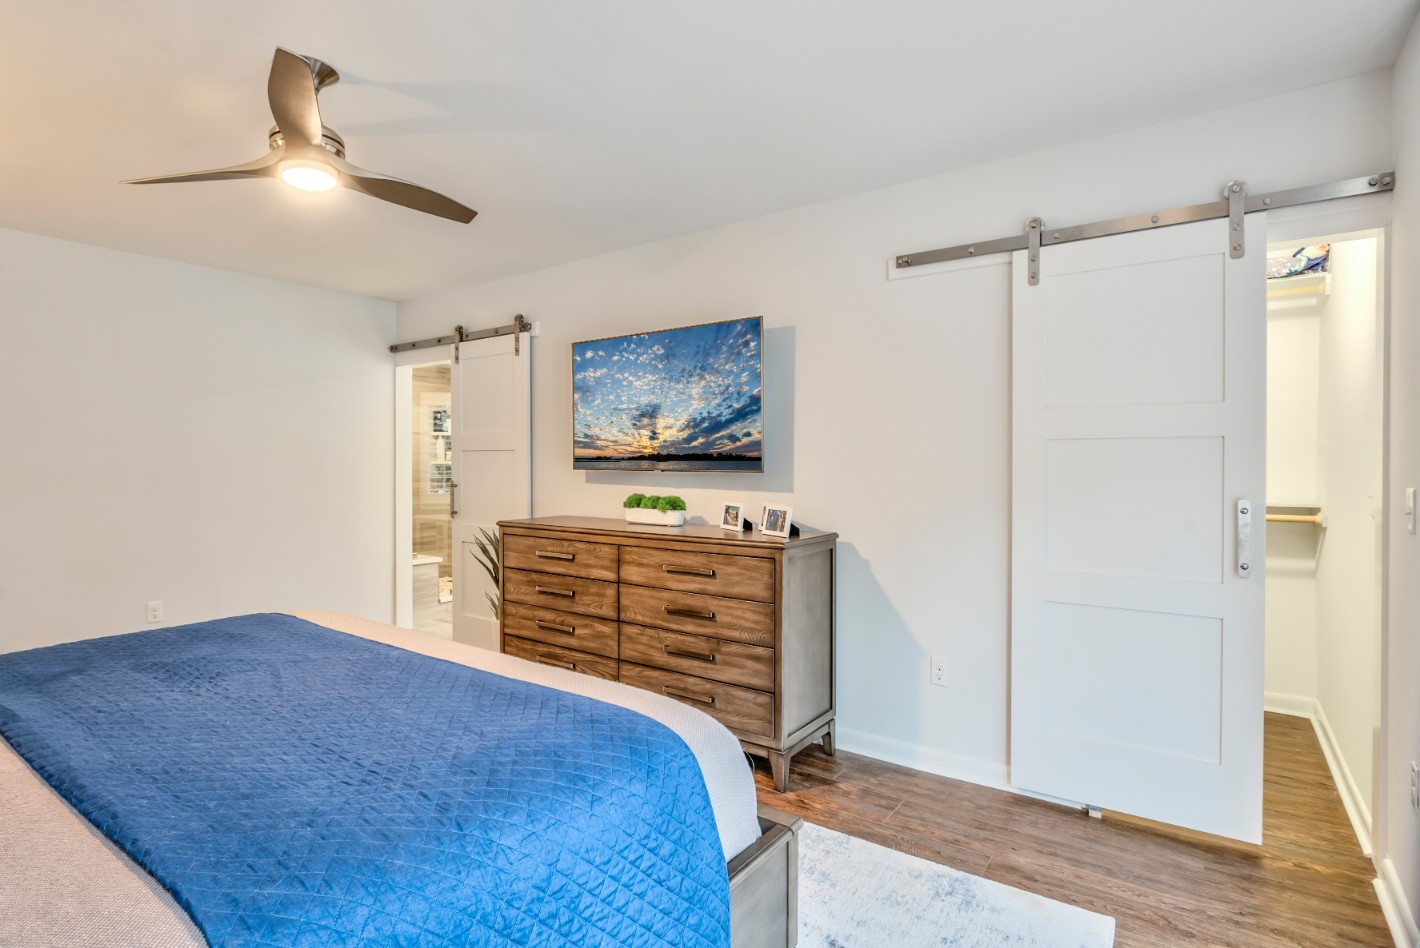 Canal Way Renovation in Bethany Beach DE - Bedroom with White Wall Paint and Two Flat Rail Sliding Barn Doors